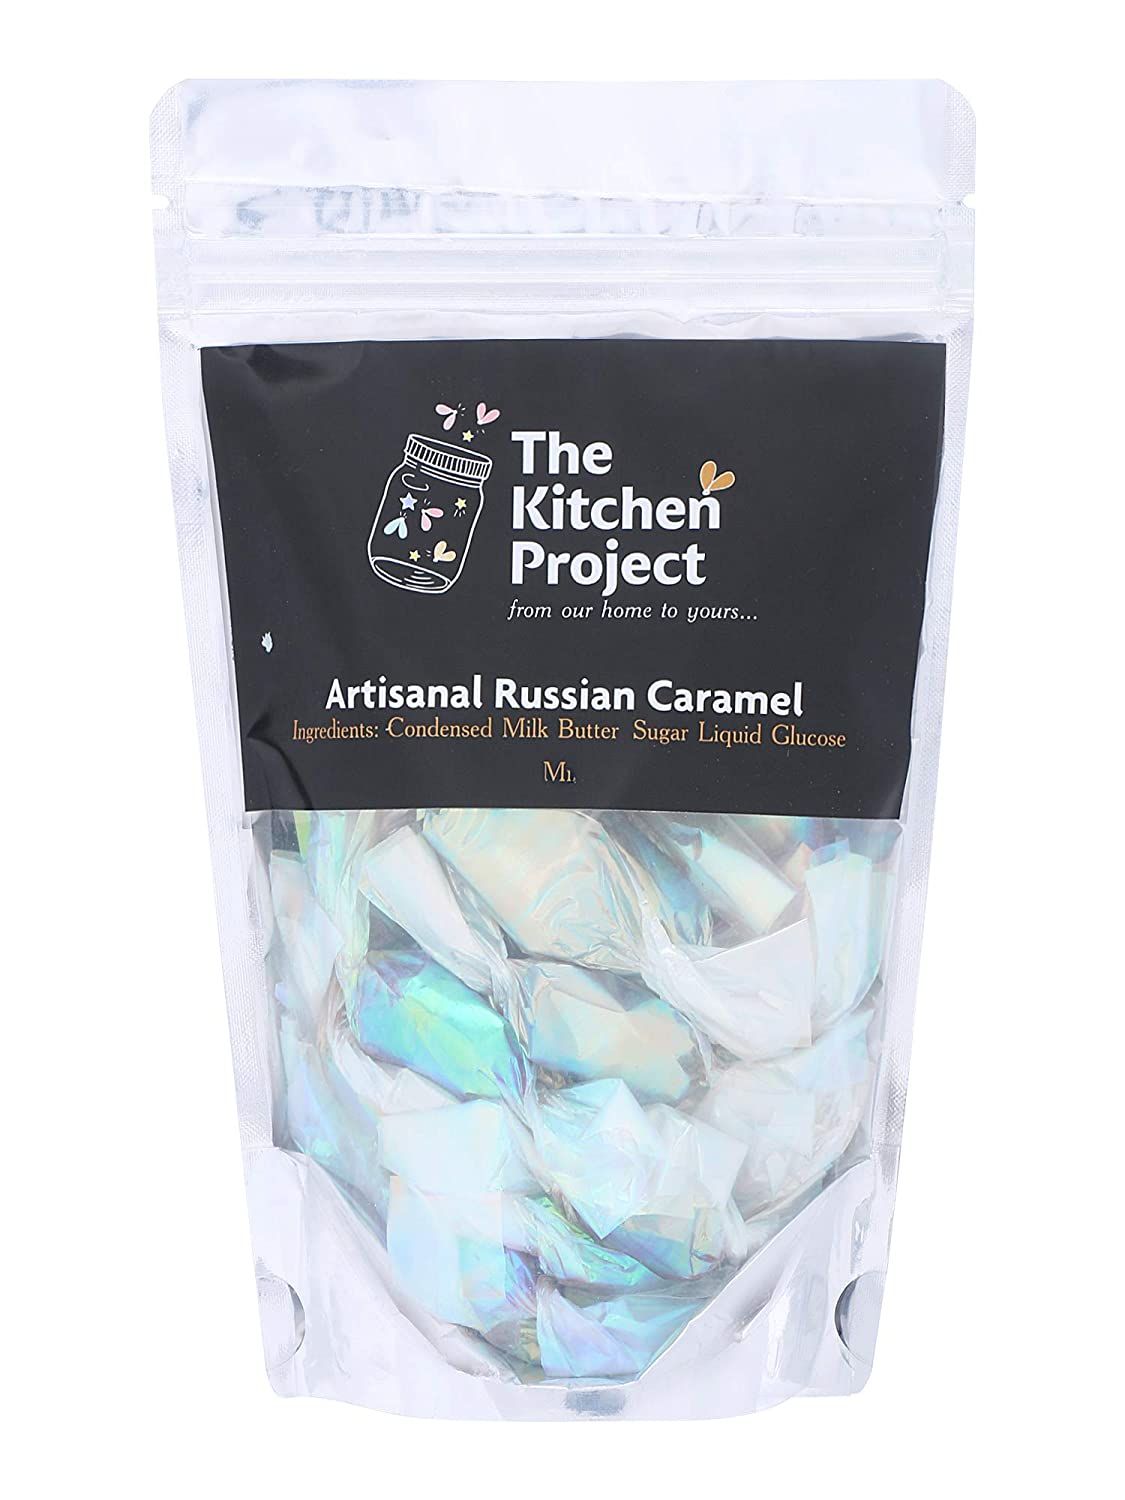 The Kitchen Project Artisanal Russian Caramels Image